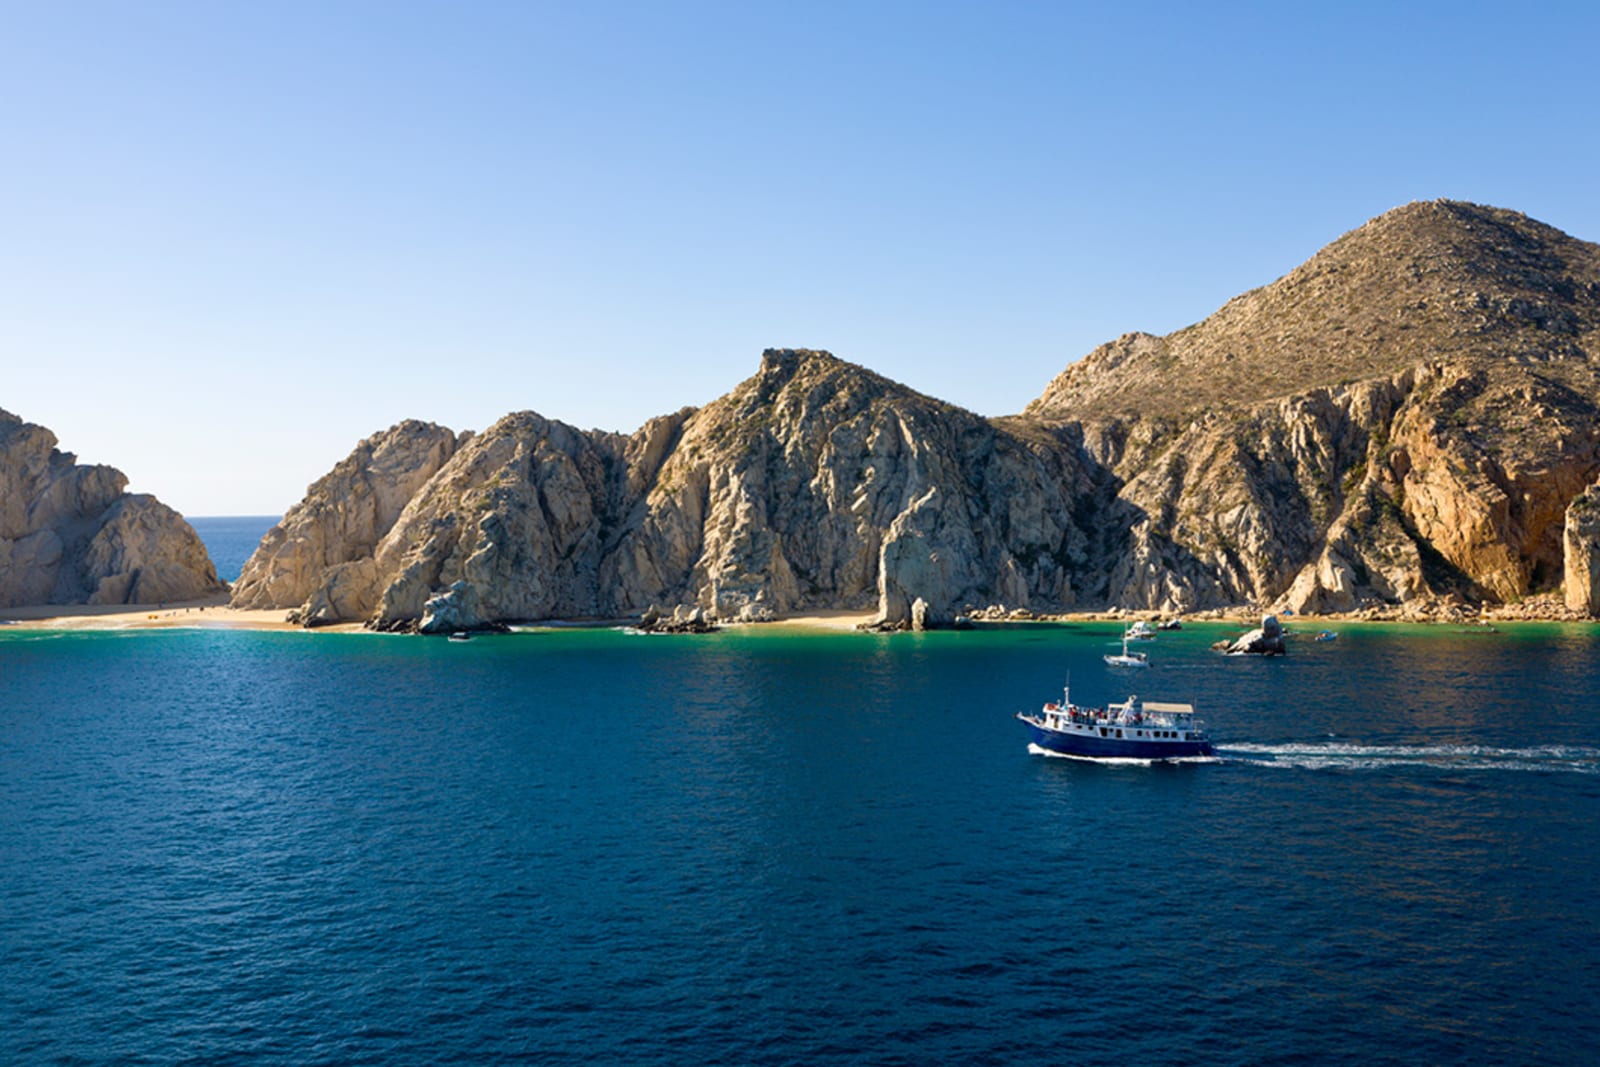 Boats approaching Lover's Beach in Cabo San Lucas